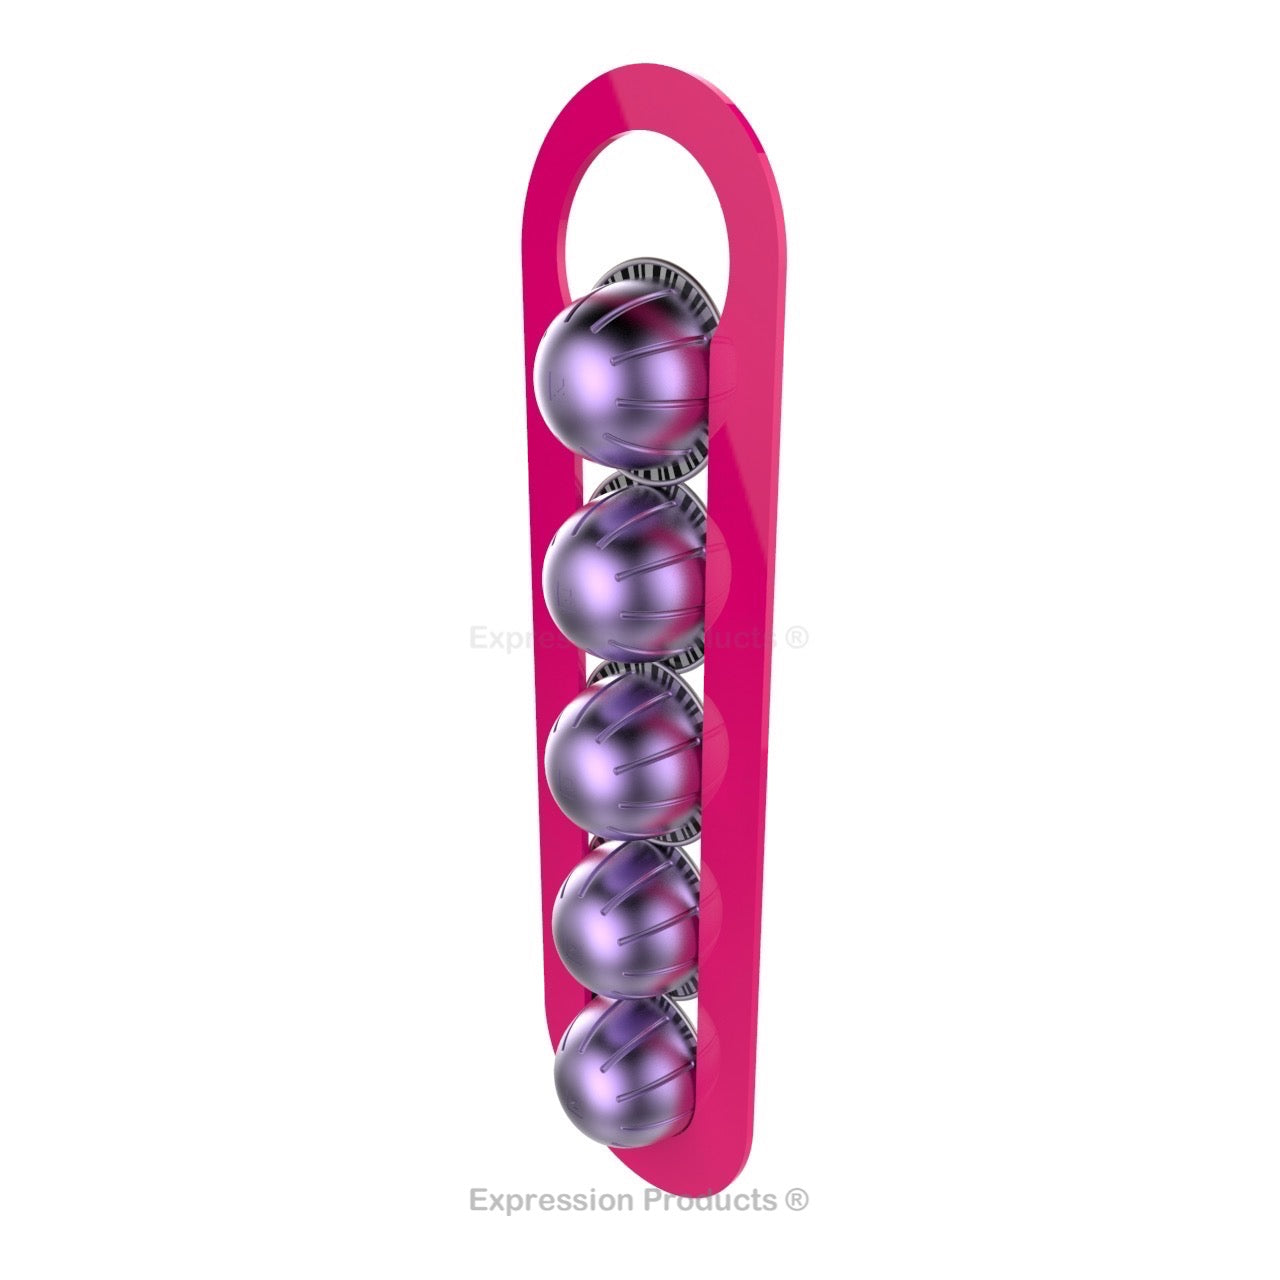 Magnetic Nespresso Vertuo capsule holder shown in pink holding 5 pods